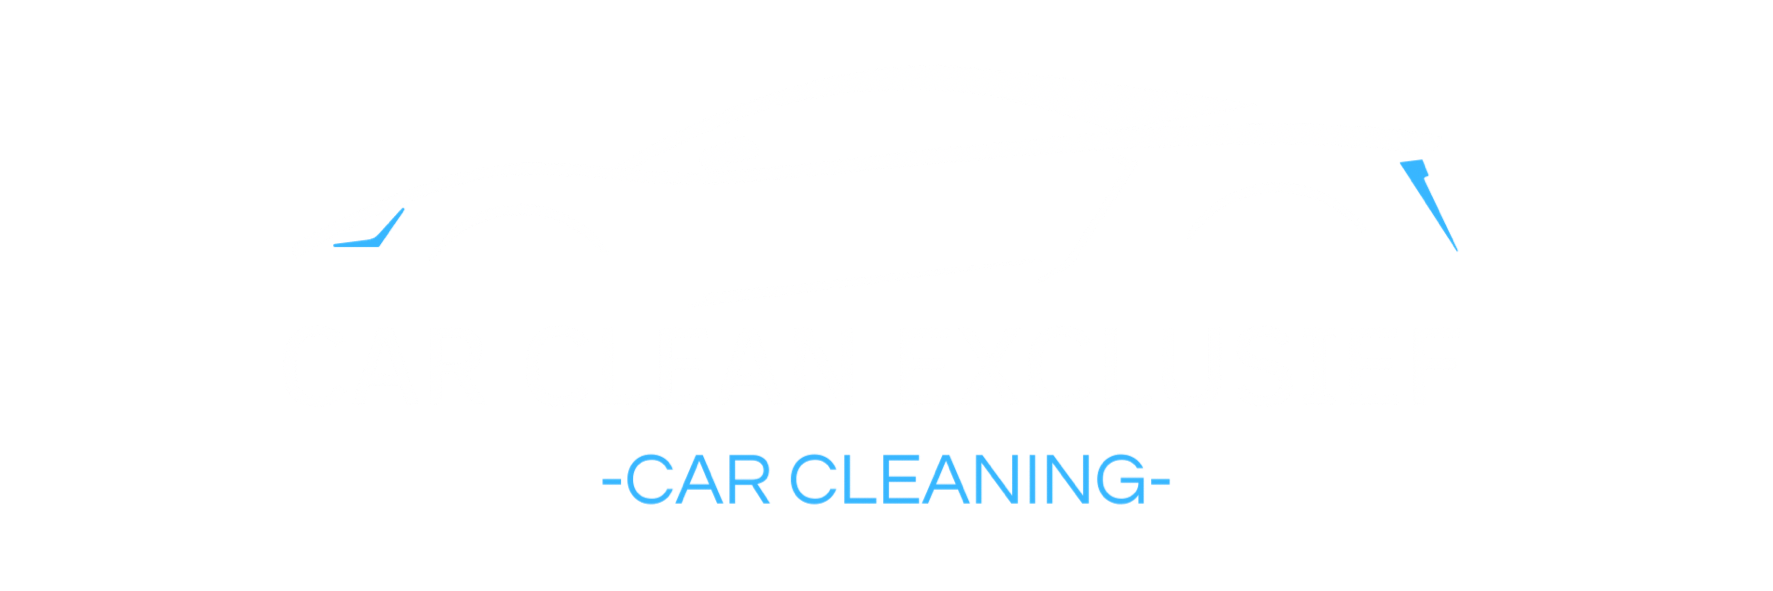 CarCleanExclusief